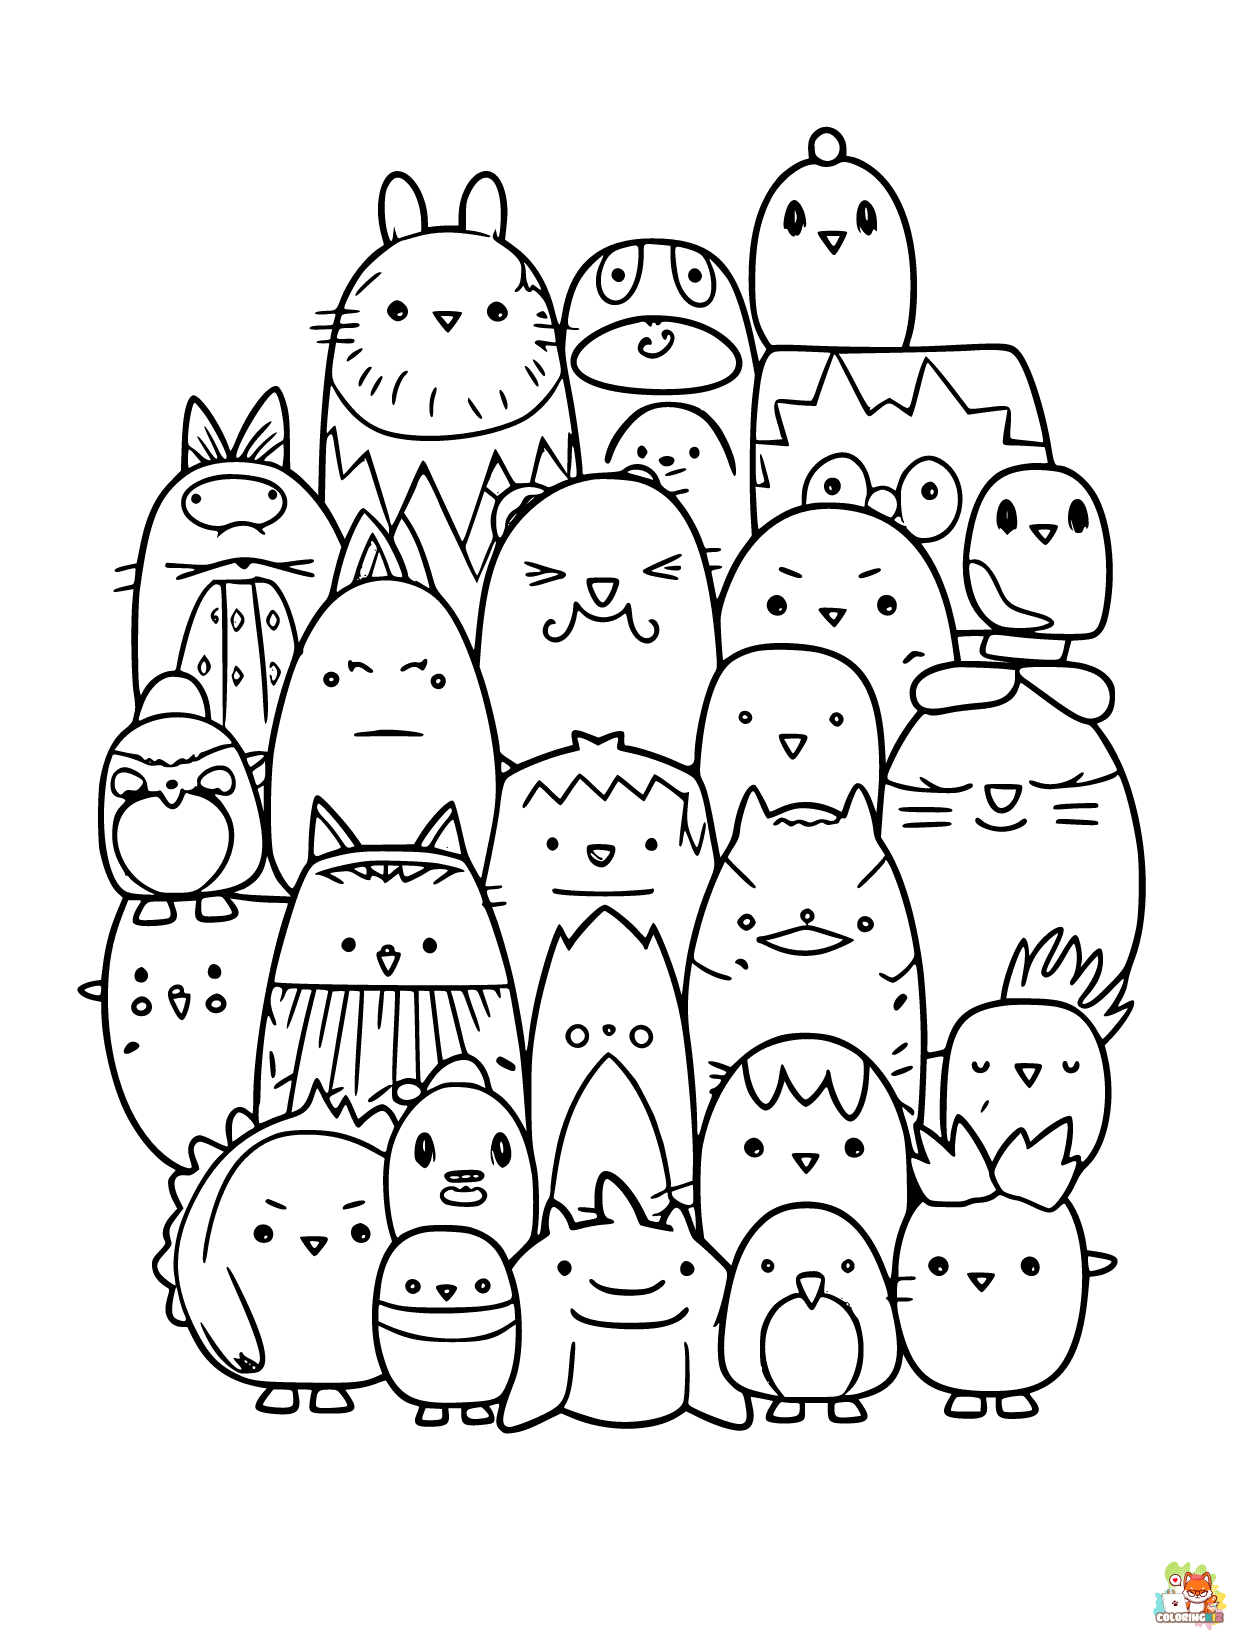 Squishmallows coloring pages 3